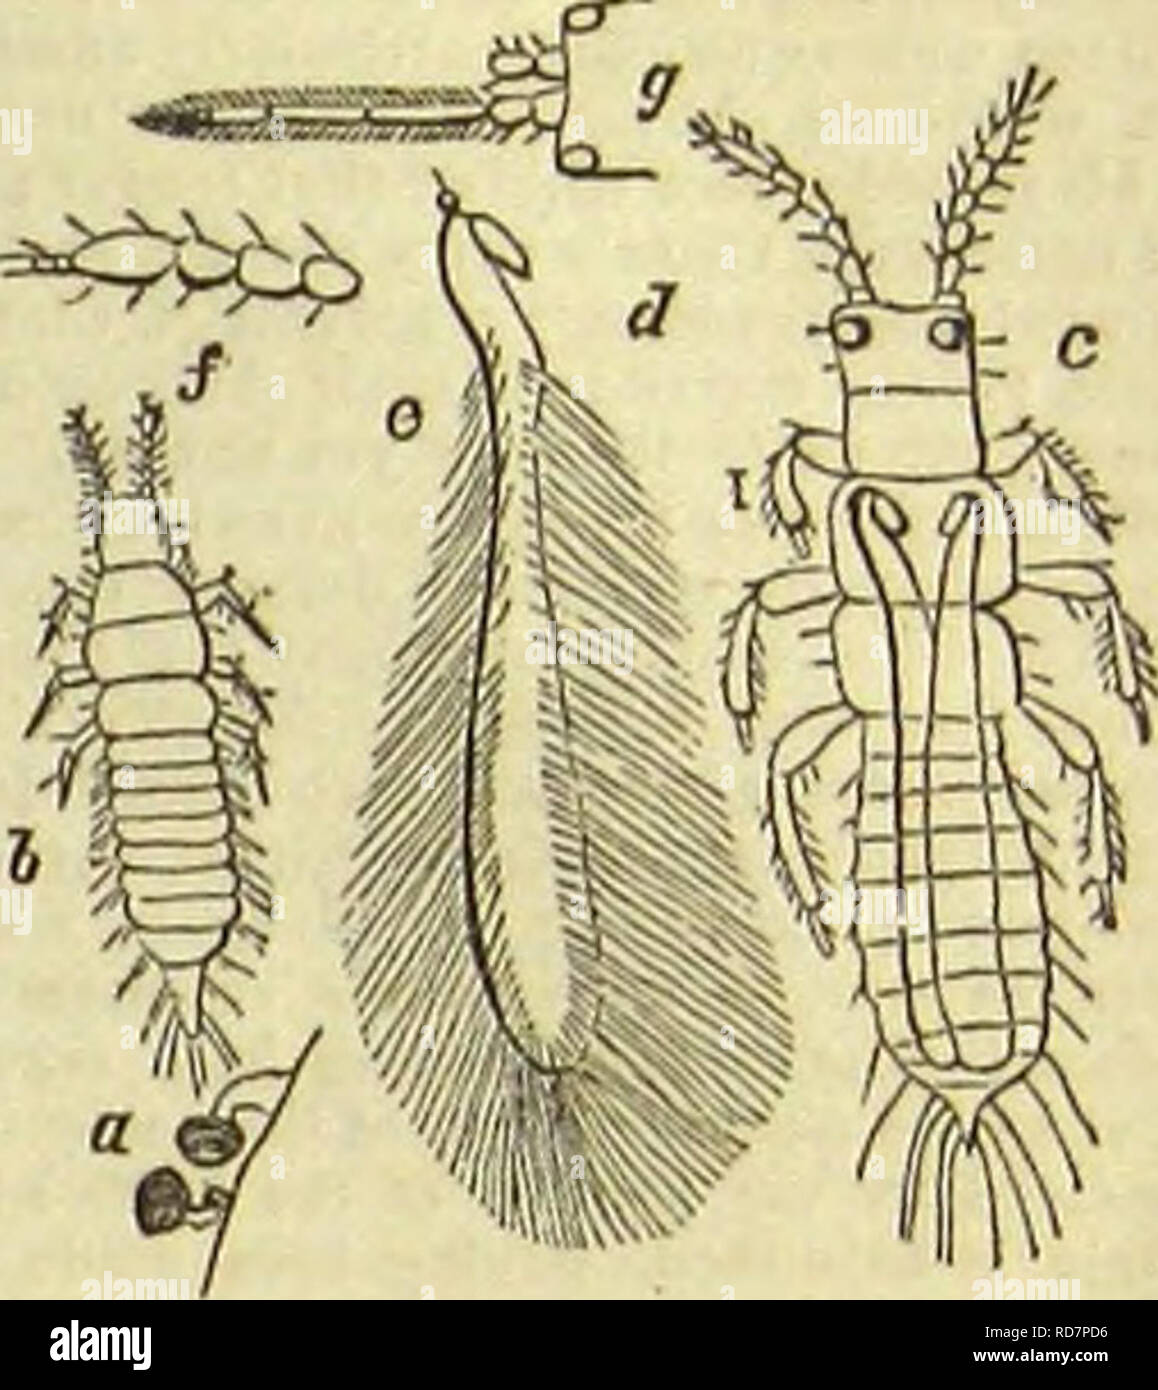 groei Ontleden Tekstschrijver Miscellaneous papers on insects. Entomology. /e^'s- €ljt 33ntiirnlist.  ENTOMOLOGY. No. 7—The Wheat Thrips and Three-banded Thrips. A leltorfrom  David Williams, (luted Gonevn, Wis- consin, July 9tll, says: Enclosed I  send you